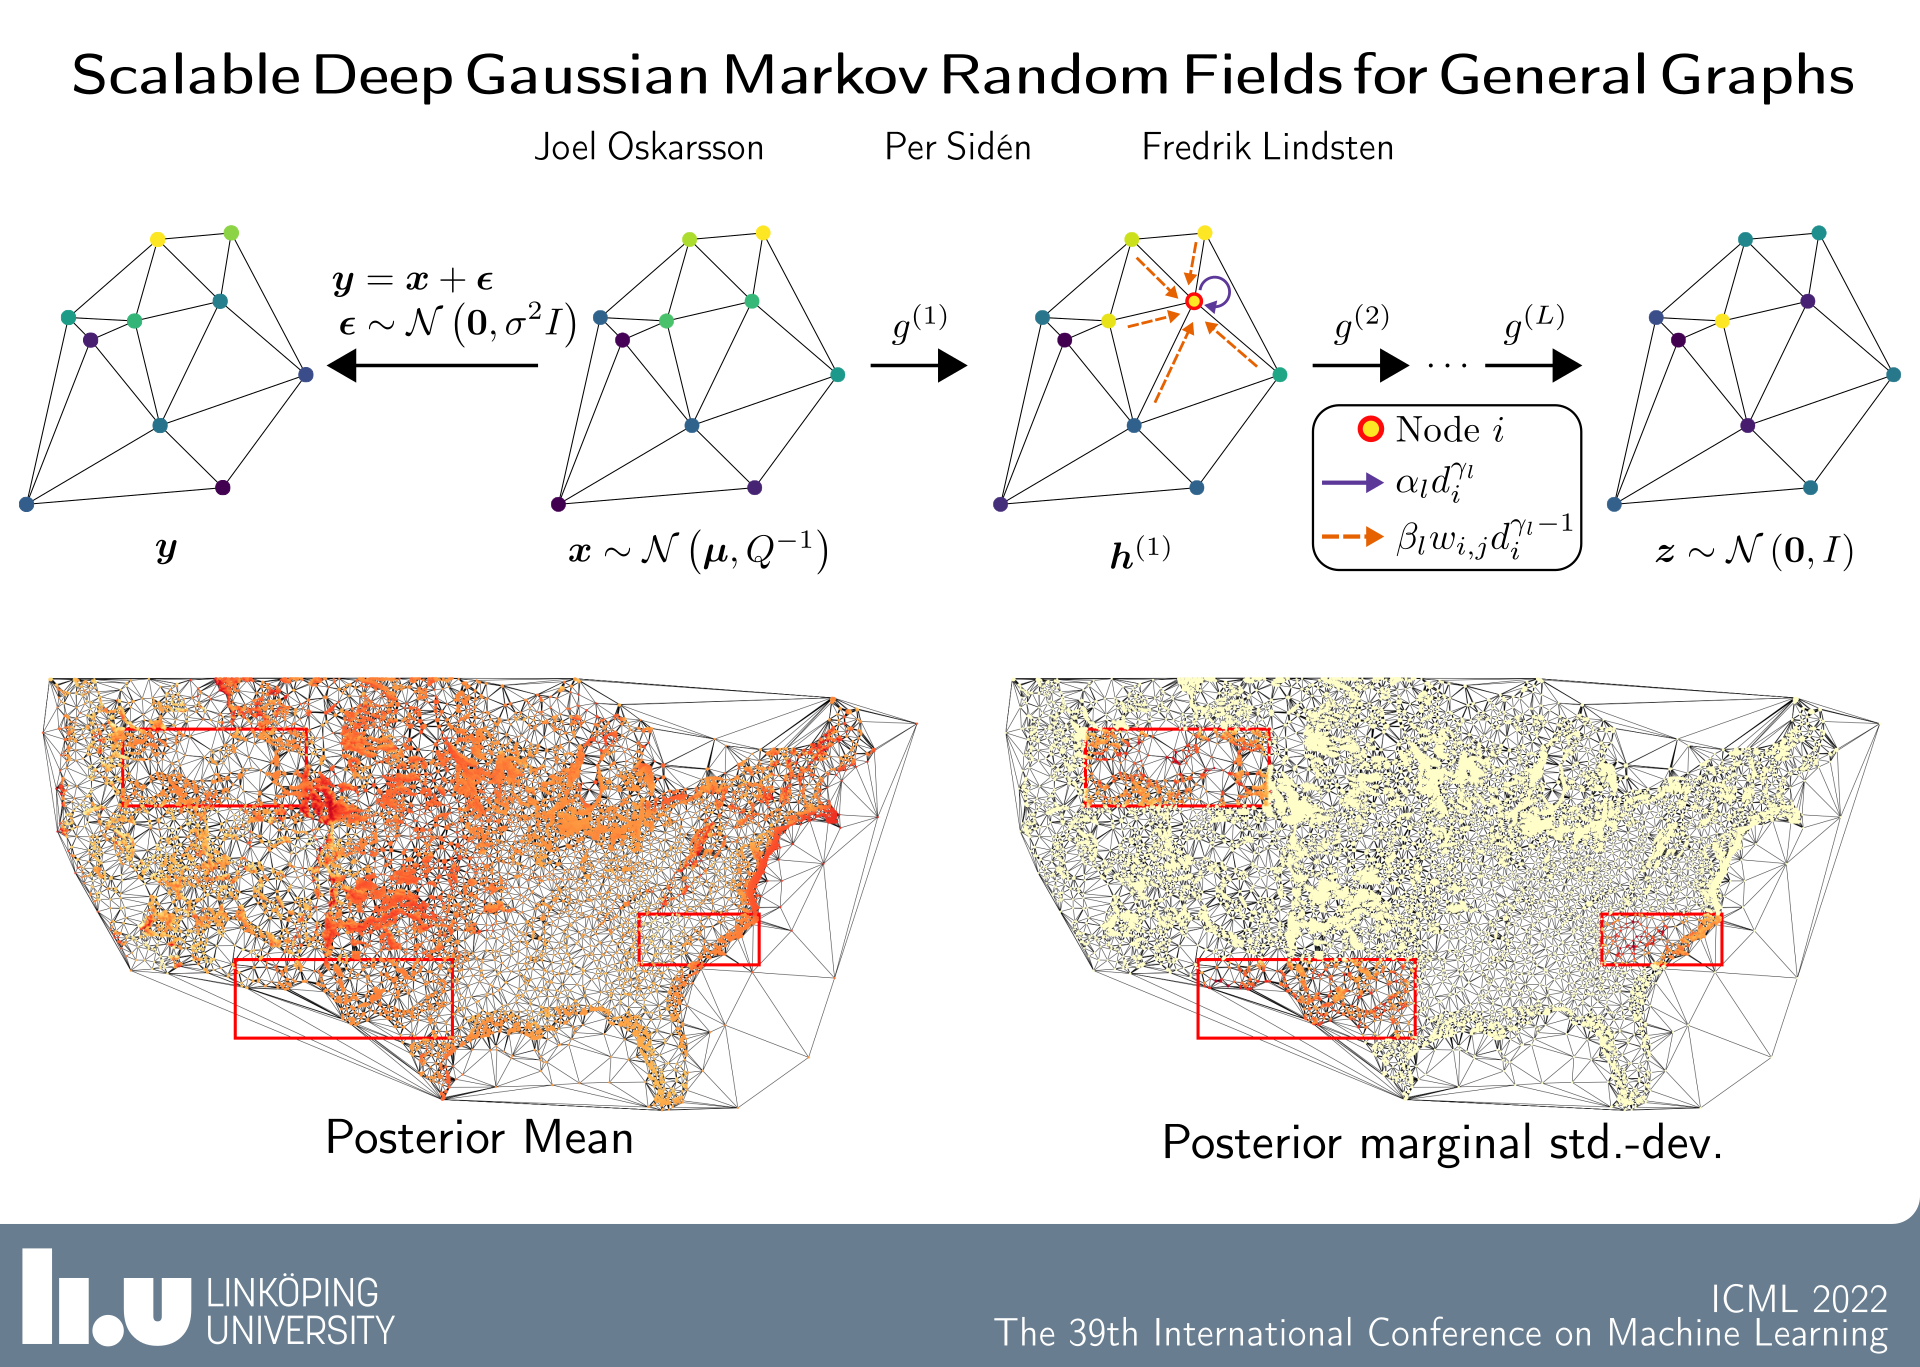 ICML Paper "Scalable Deep Gaussian Markov Random Fields for General